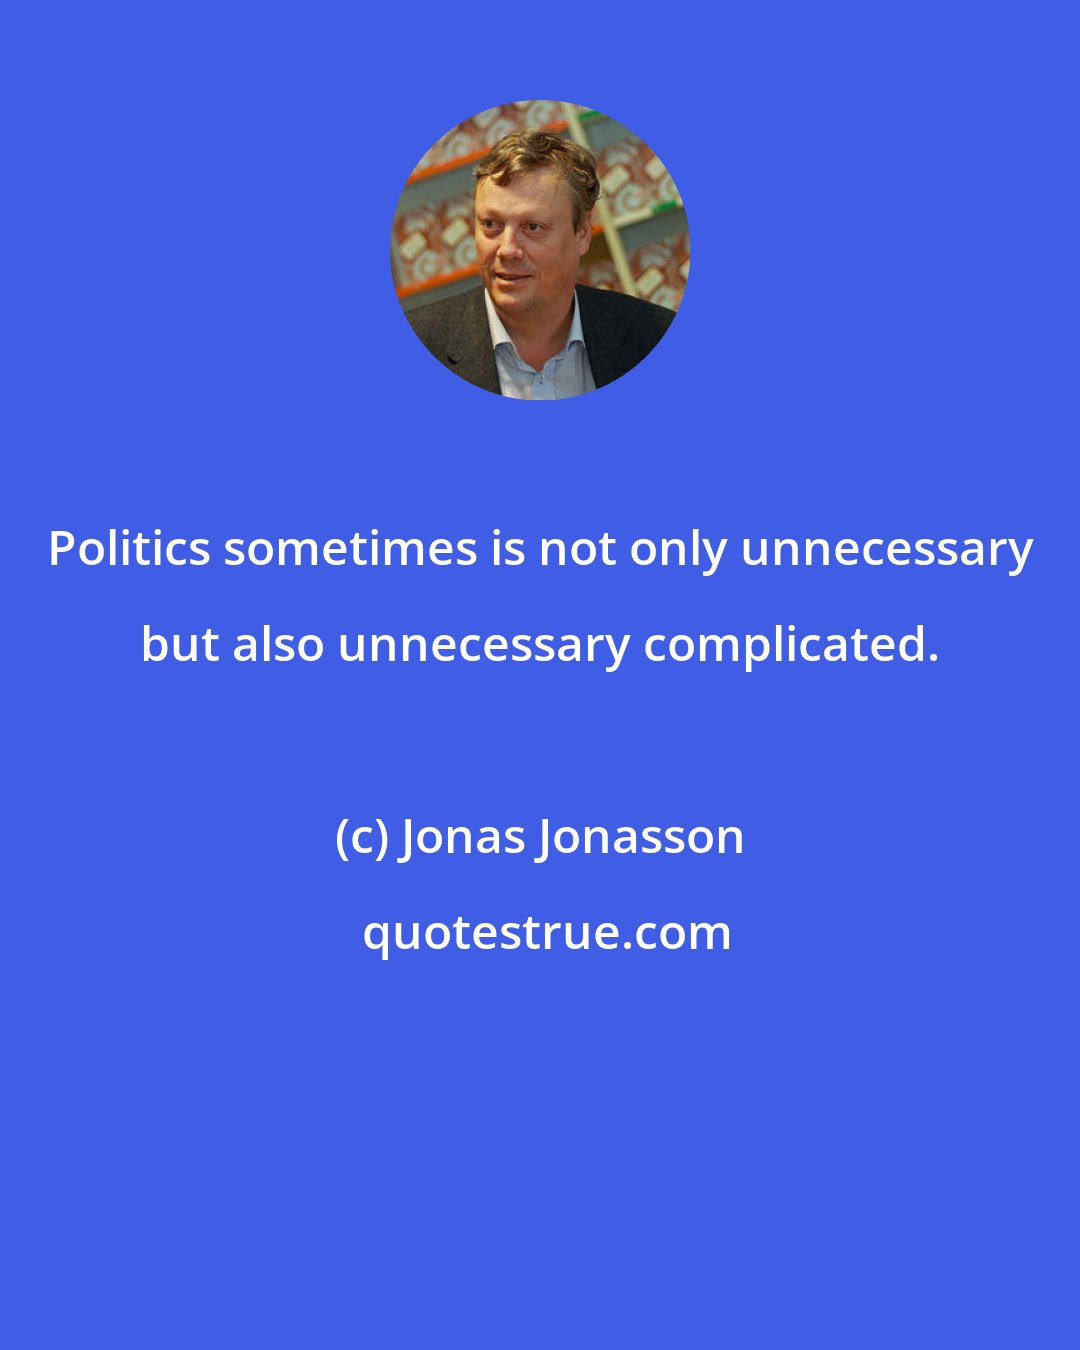 Jonas Jonasson: Politics sometimes is not only unnecessary but also unnecessary complicated.